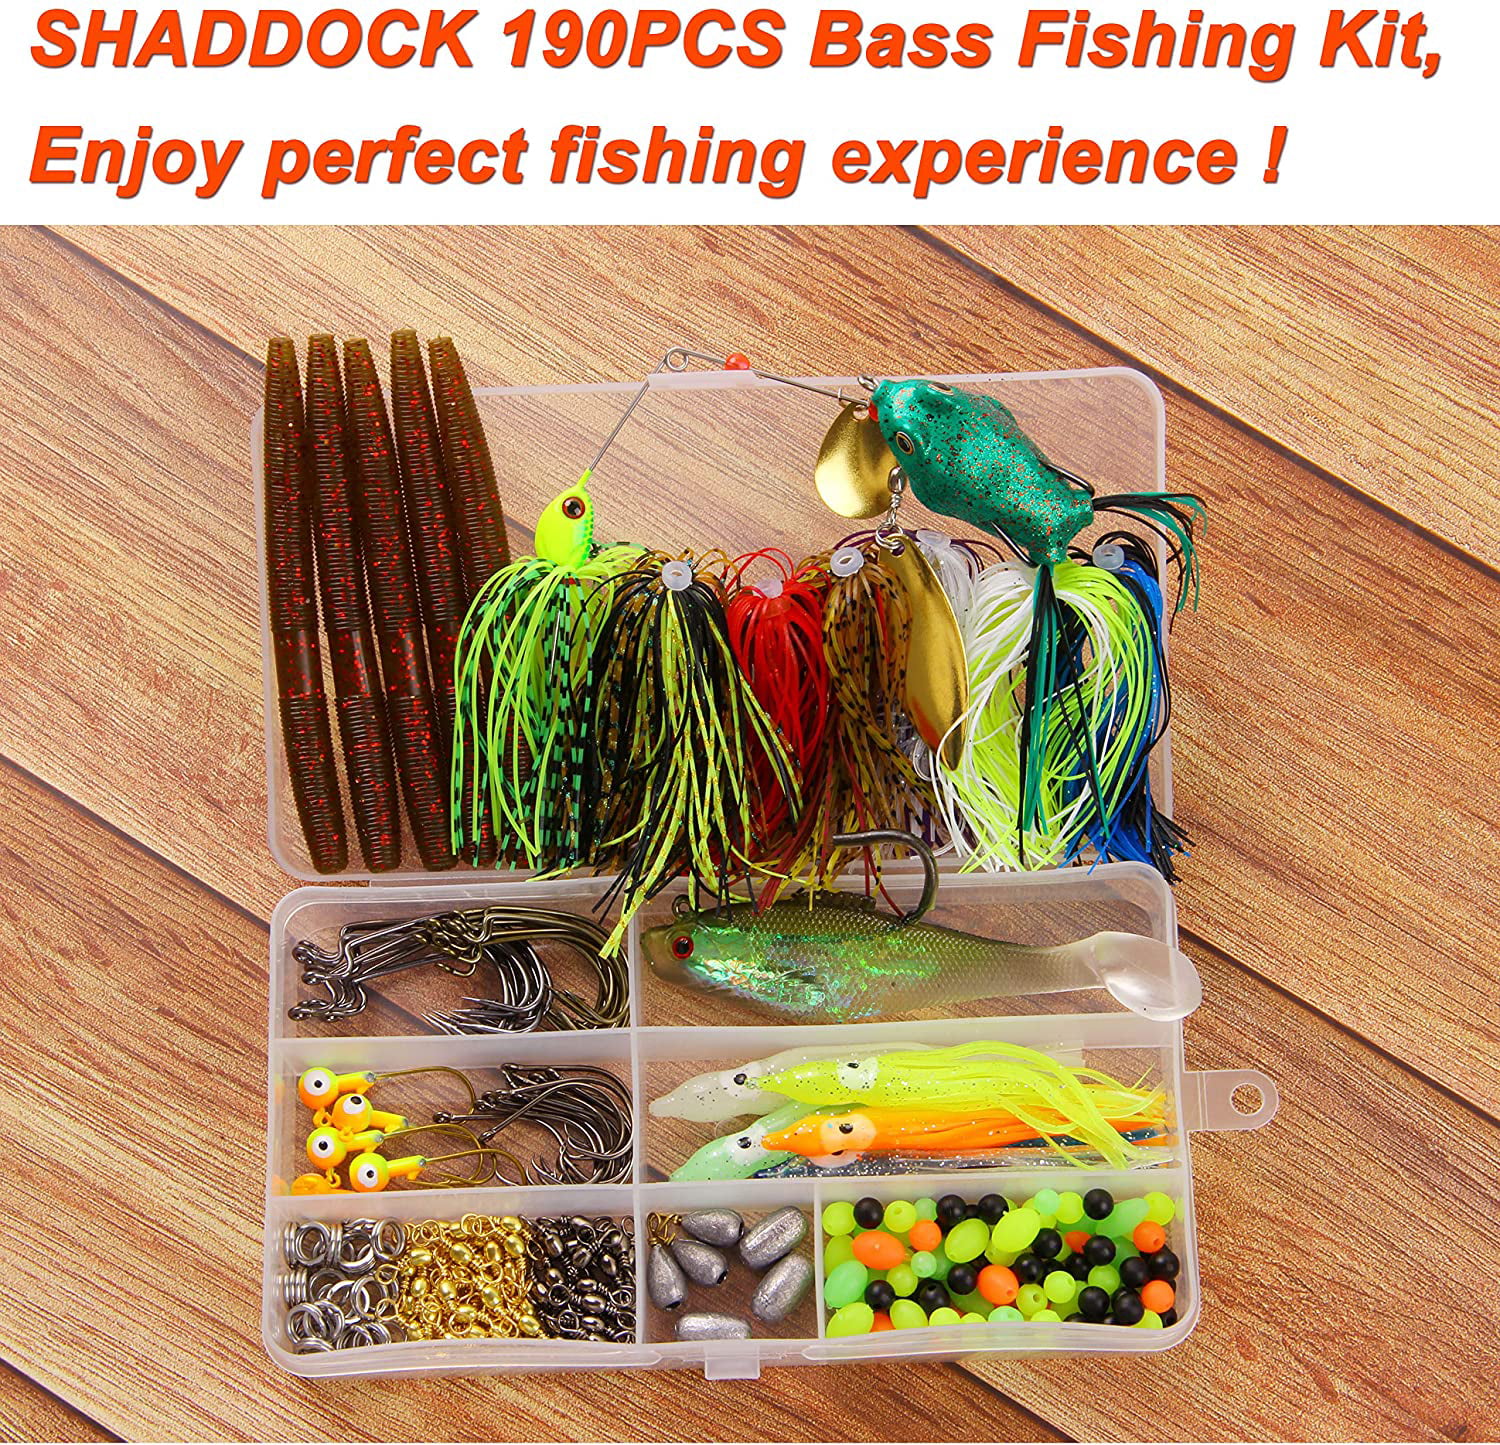 Bass Fishing Lure Kit Tackle Box Freshwater Fishing Kit-Includes Crankbaits,  Spinner Baits, Plastic Worms, Jigs, Topwater Lures, Spoon Lures, Fishing  Gear Kit for Trout Salmon Catfish 